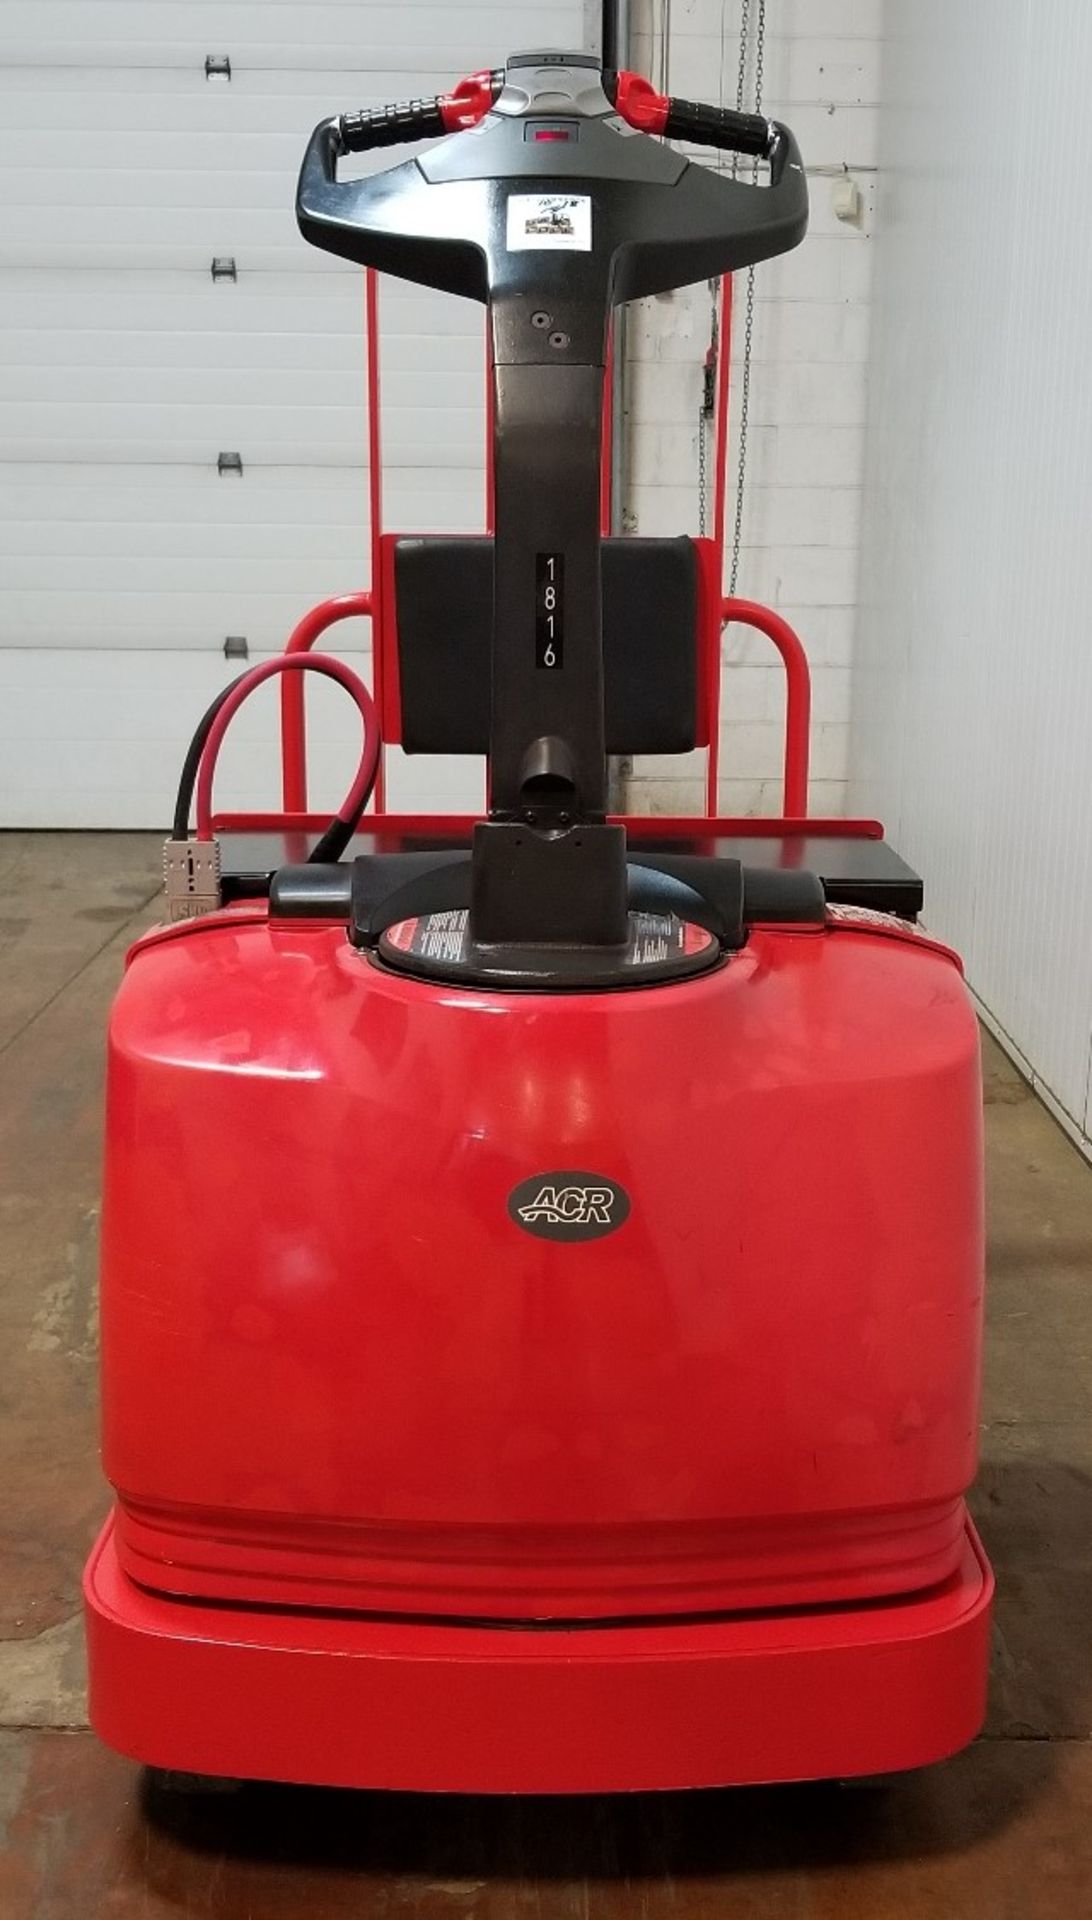 RAYMOND (2012) 8500 24V ELECTRIC RIDE-ON PALLET JACK WITH 6000 LB. CAPACITY, S/N: 850-12-83848 (UNIT - Image 2 of 2